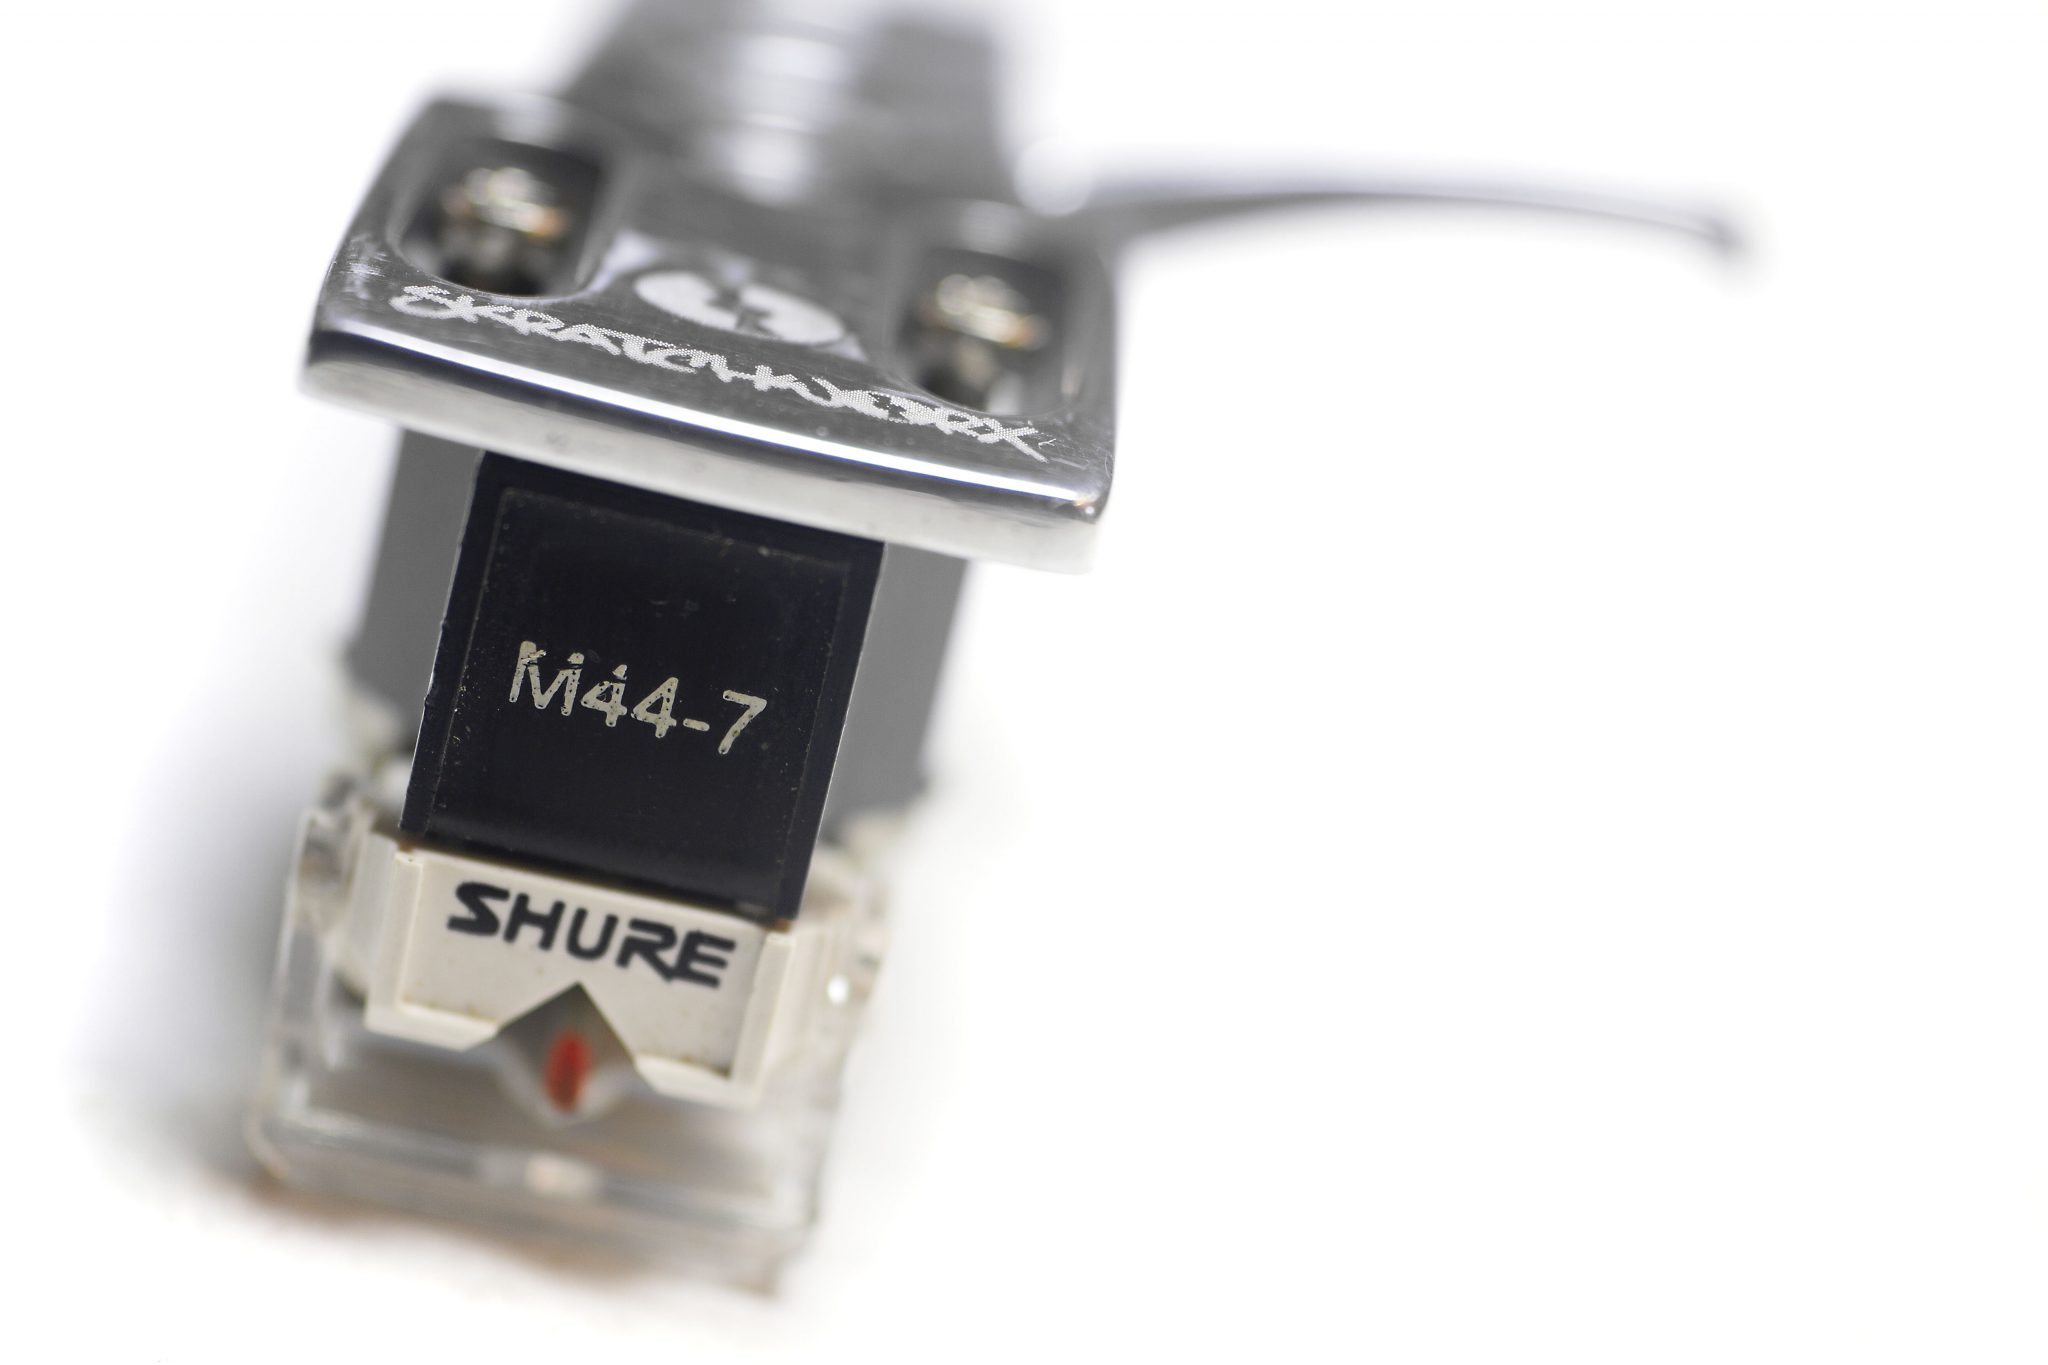 Rumour busting: Shure M44-7 NOT discontinued • DJWORX